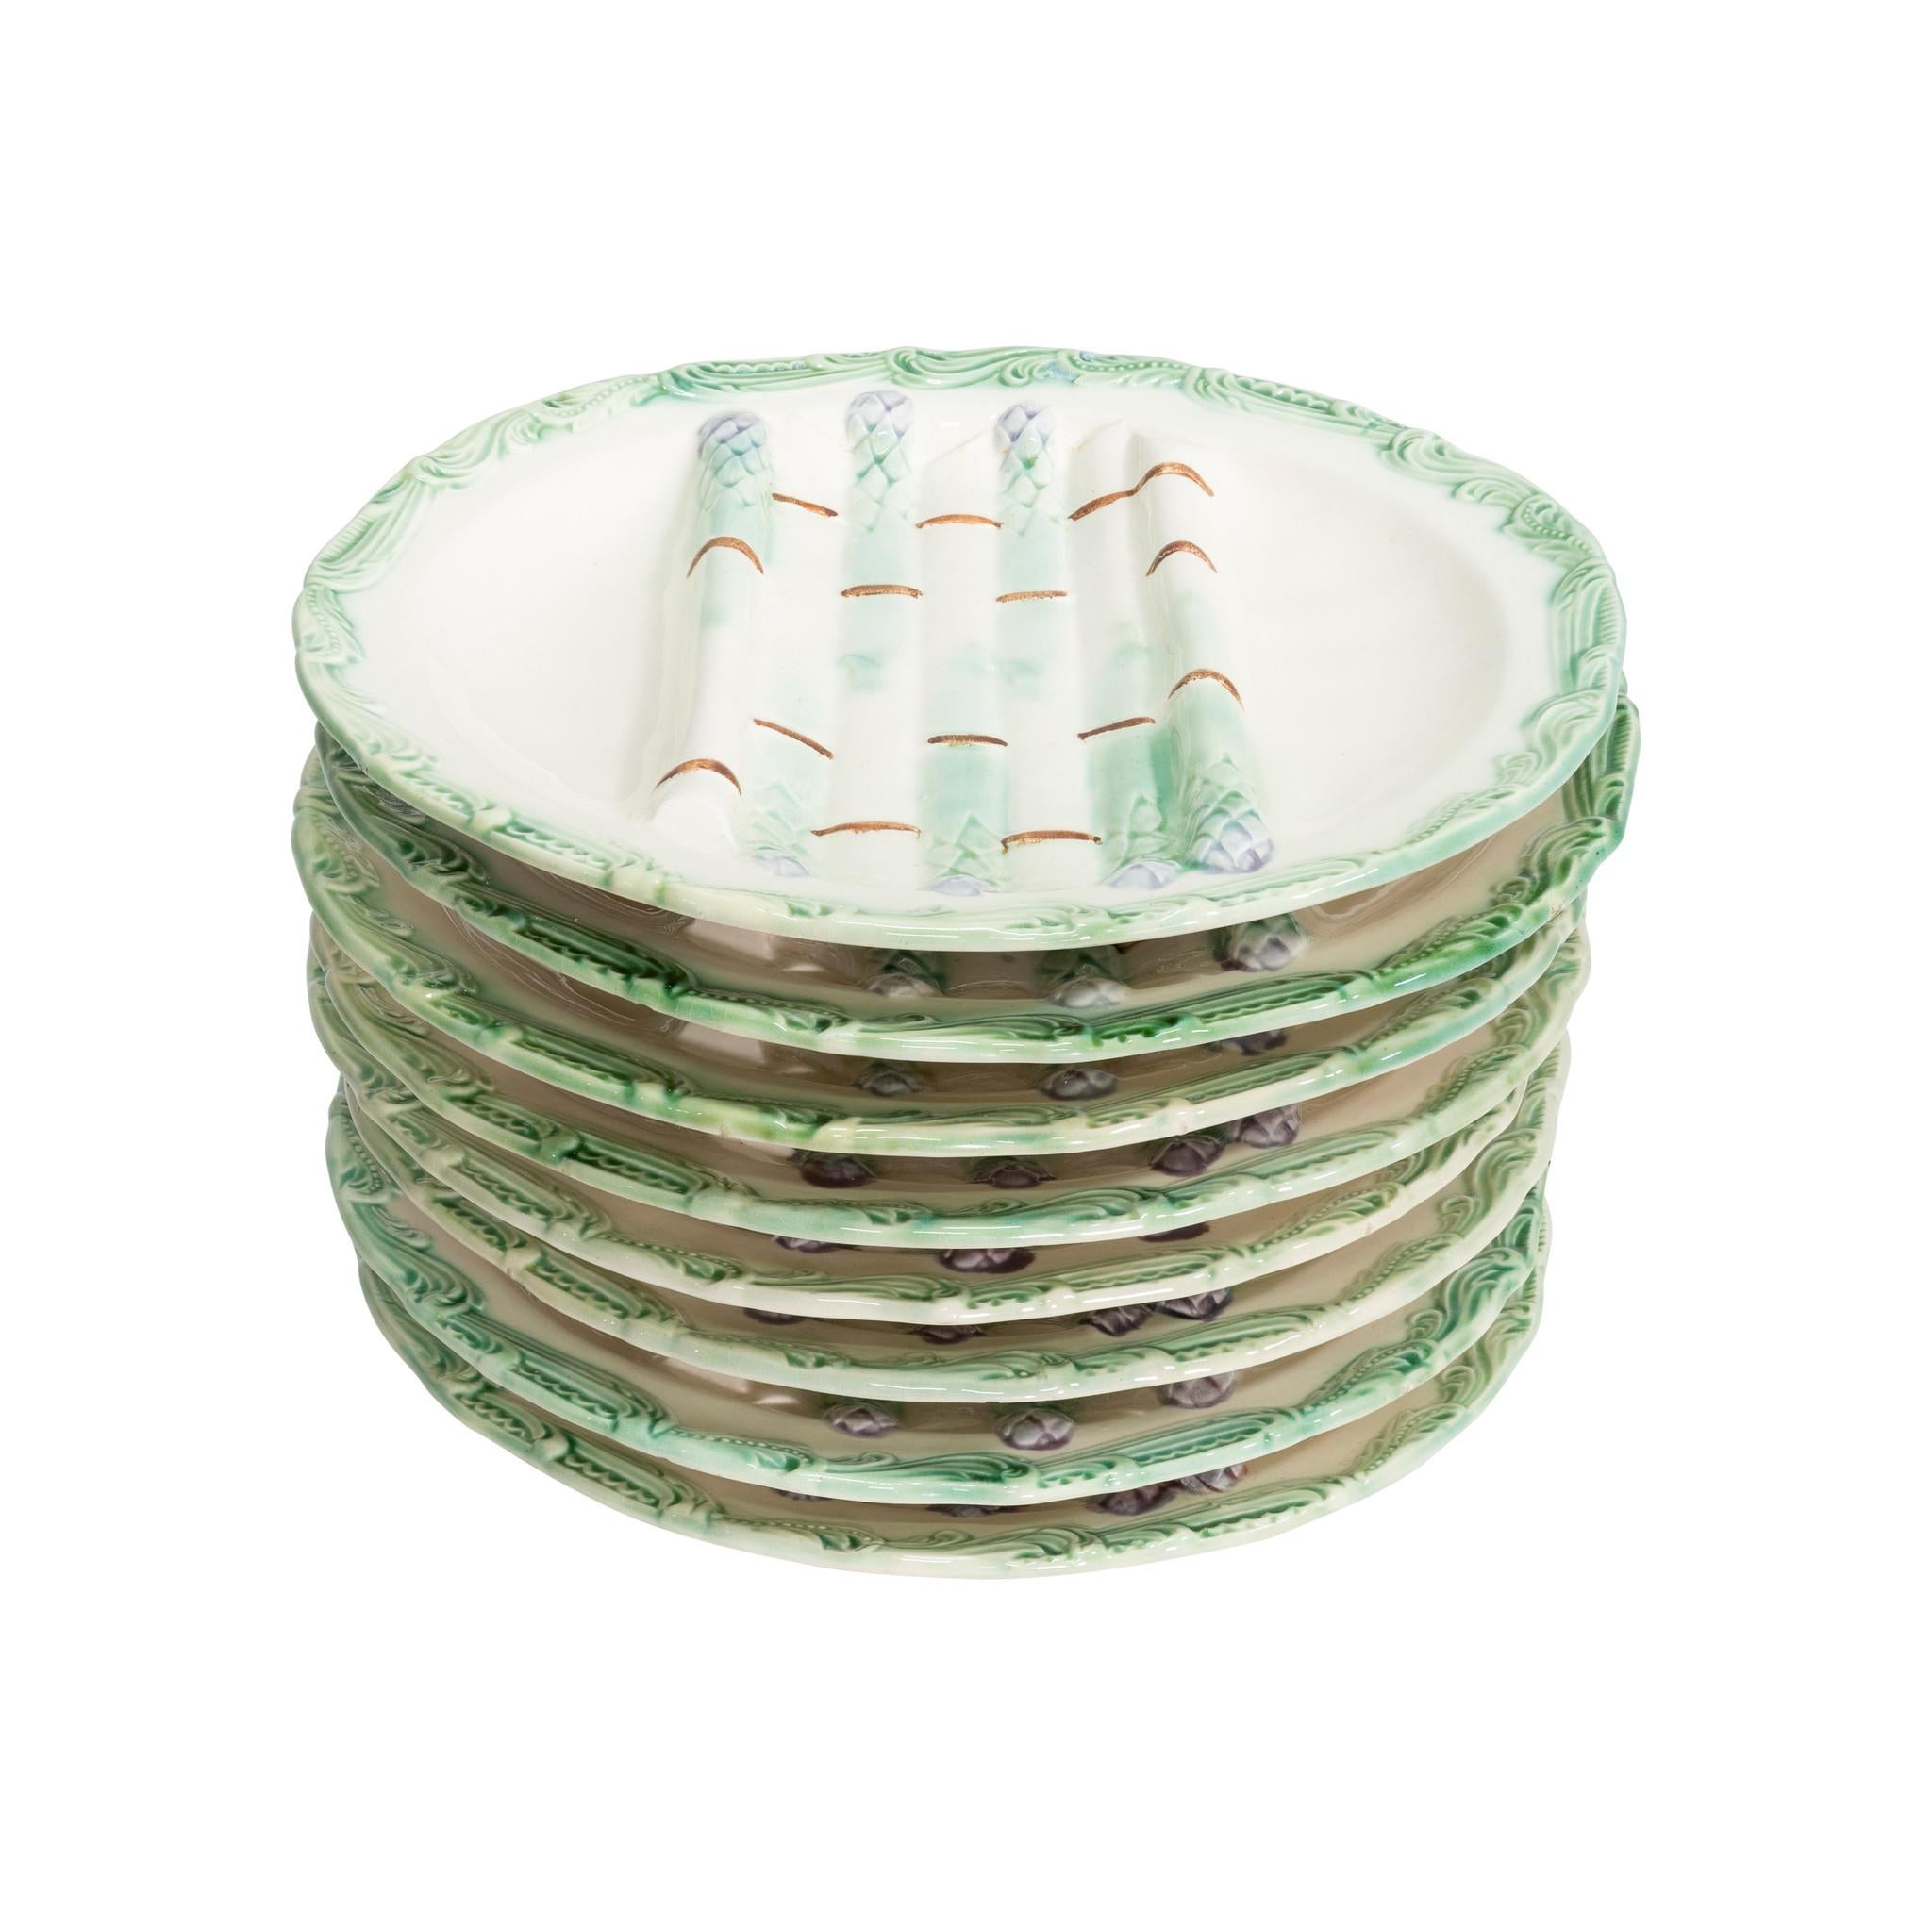 French Majolica Asparagus Plates, Set of 8 In Excellent Condition For Sale In Coeur d'Alene, ID